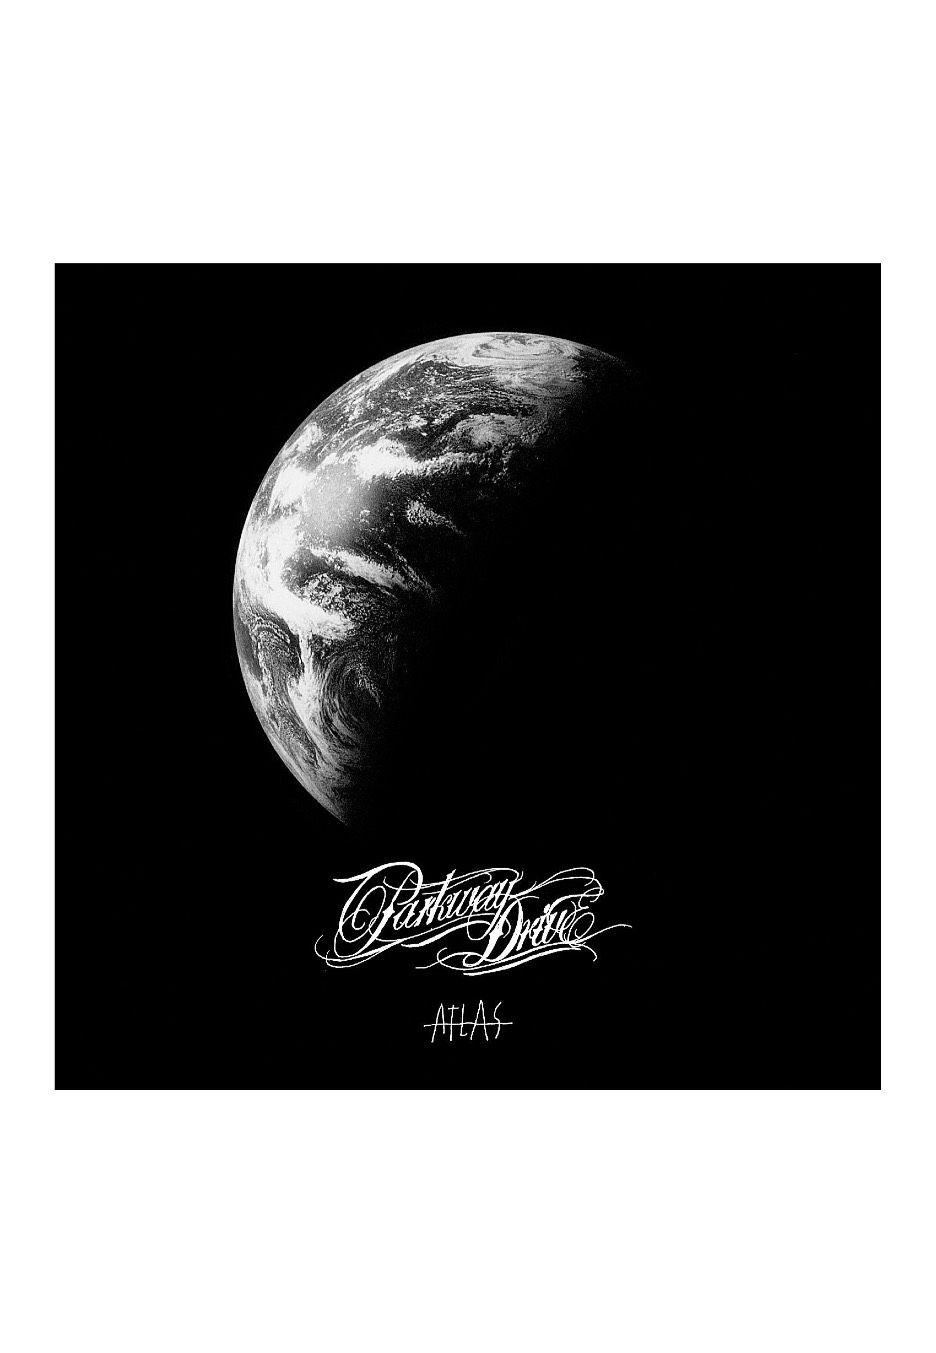 Parkway Drive Atlas Logo - Parkway Drive - Atlas - CD - CDs, Vinyl and DVDs of your favourite ...